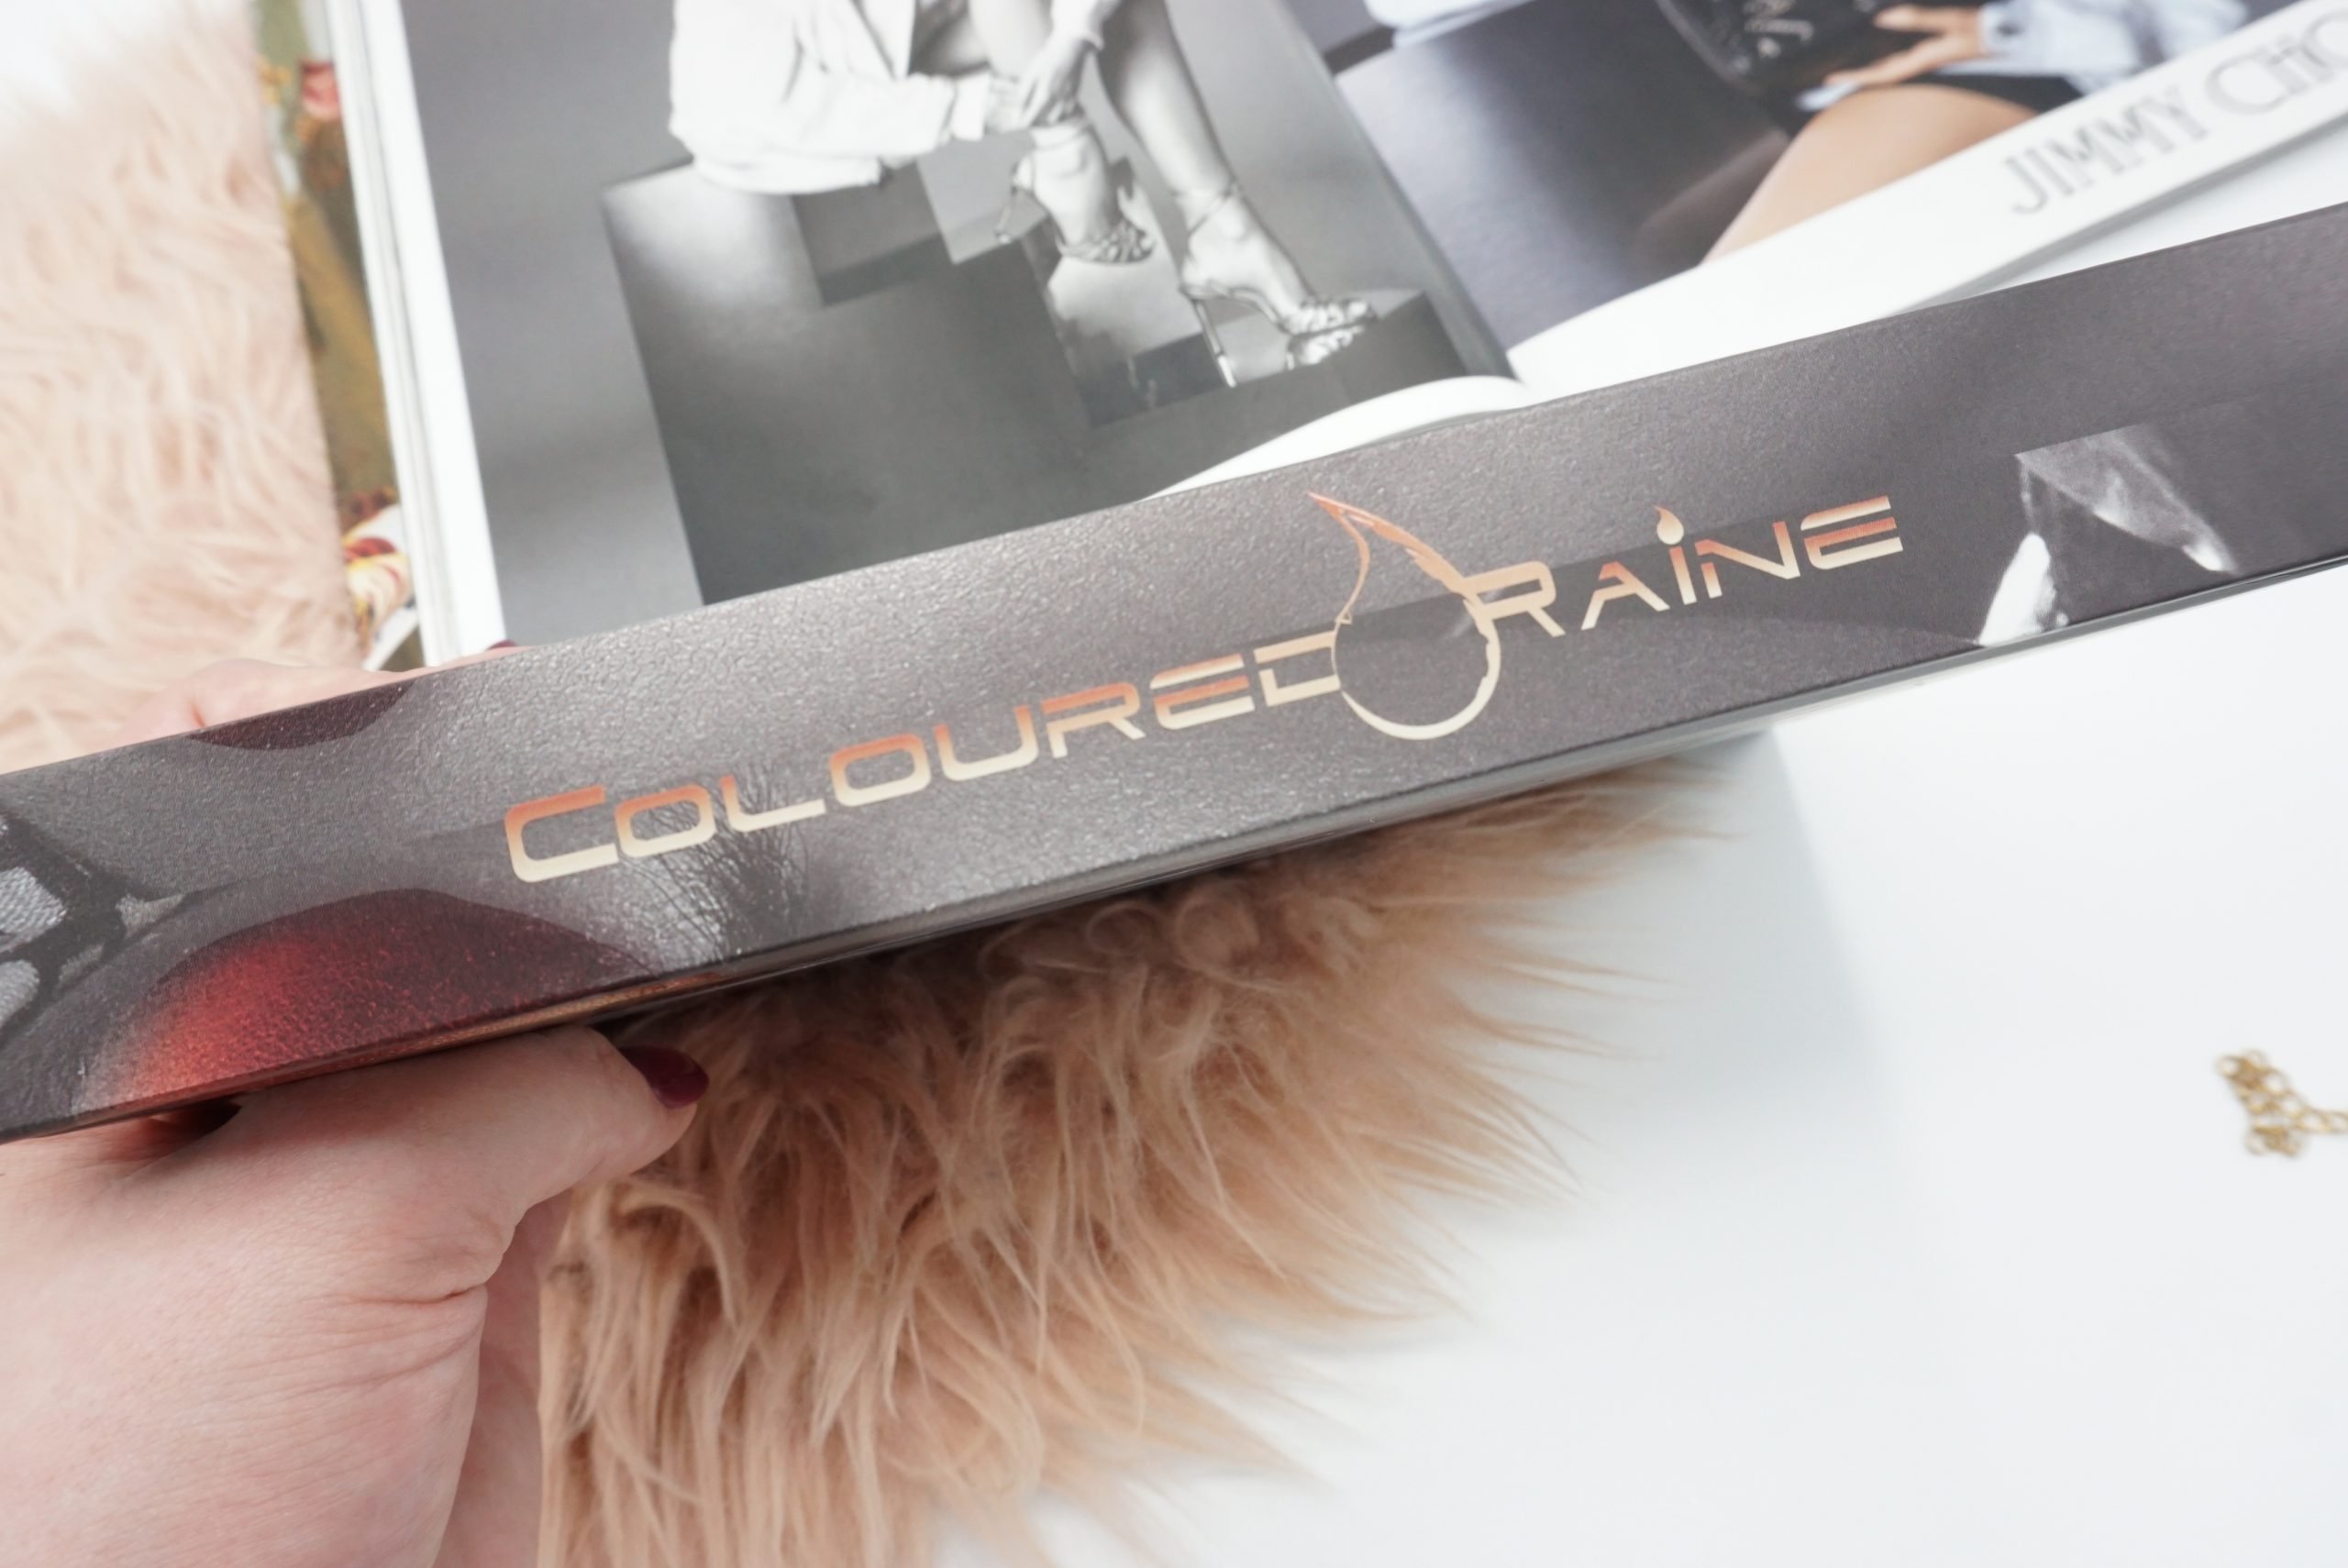 New Coloured Raine Book Of Shades: Store Up to 72 Eyeshadow Singles! 